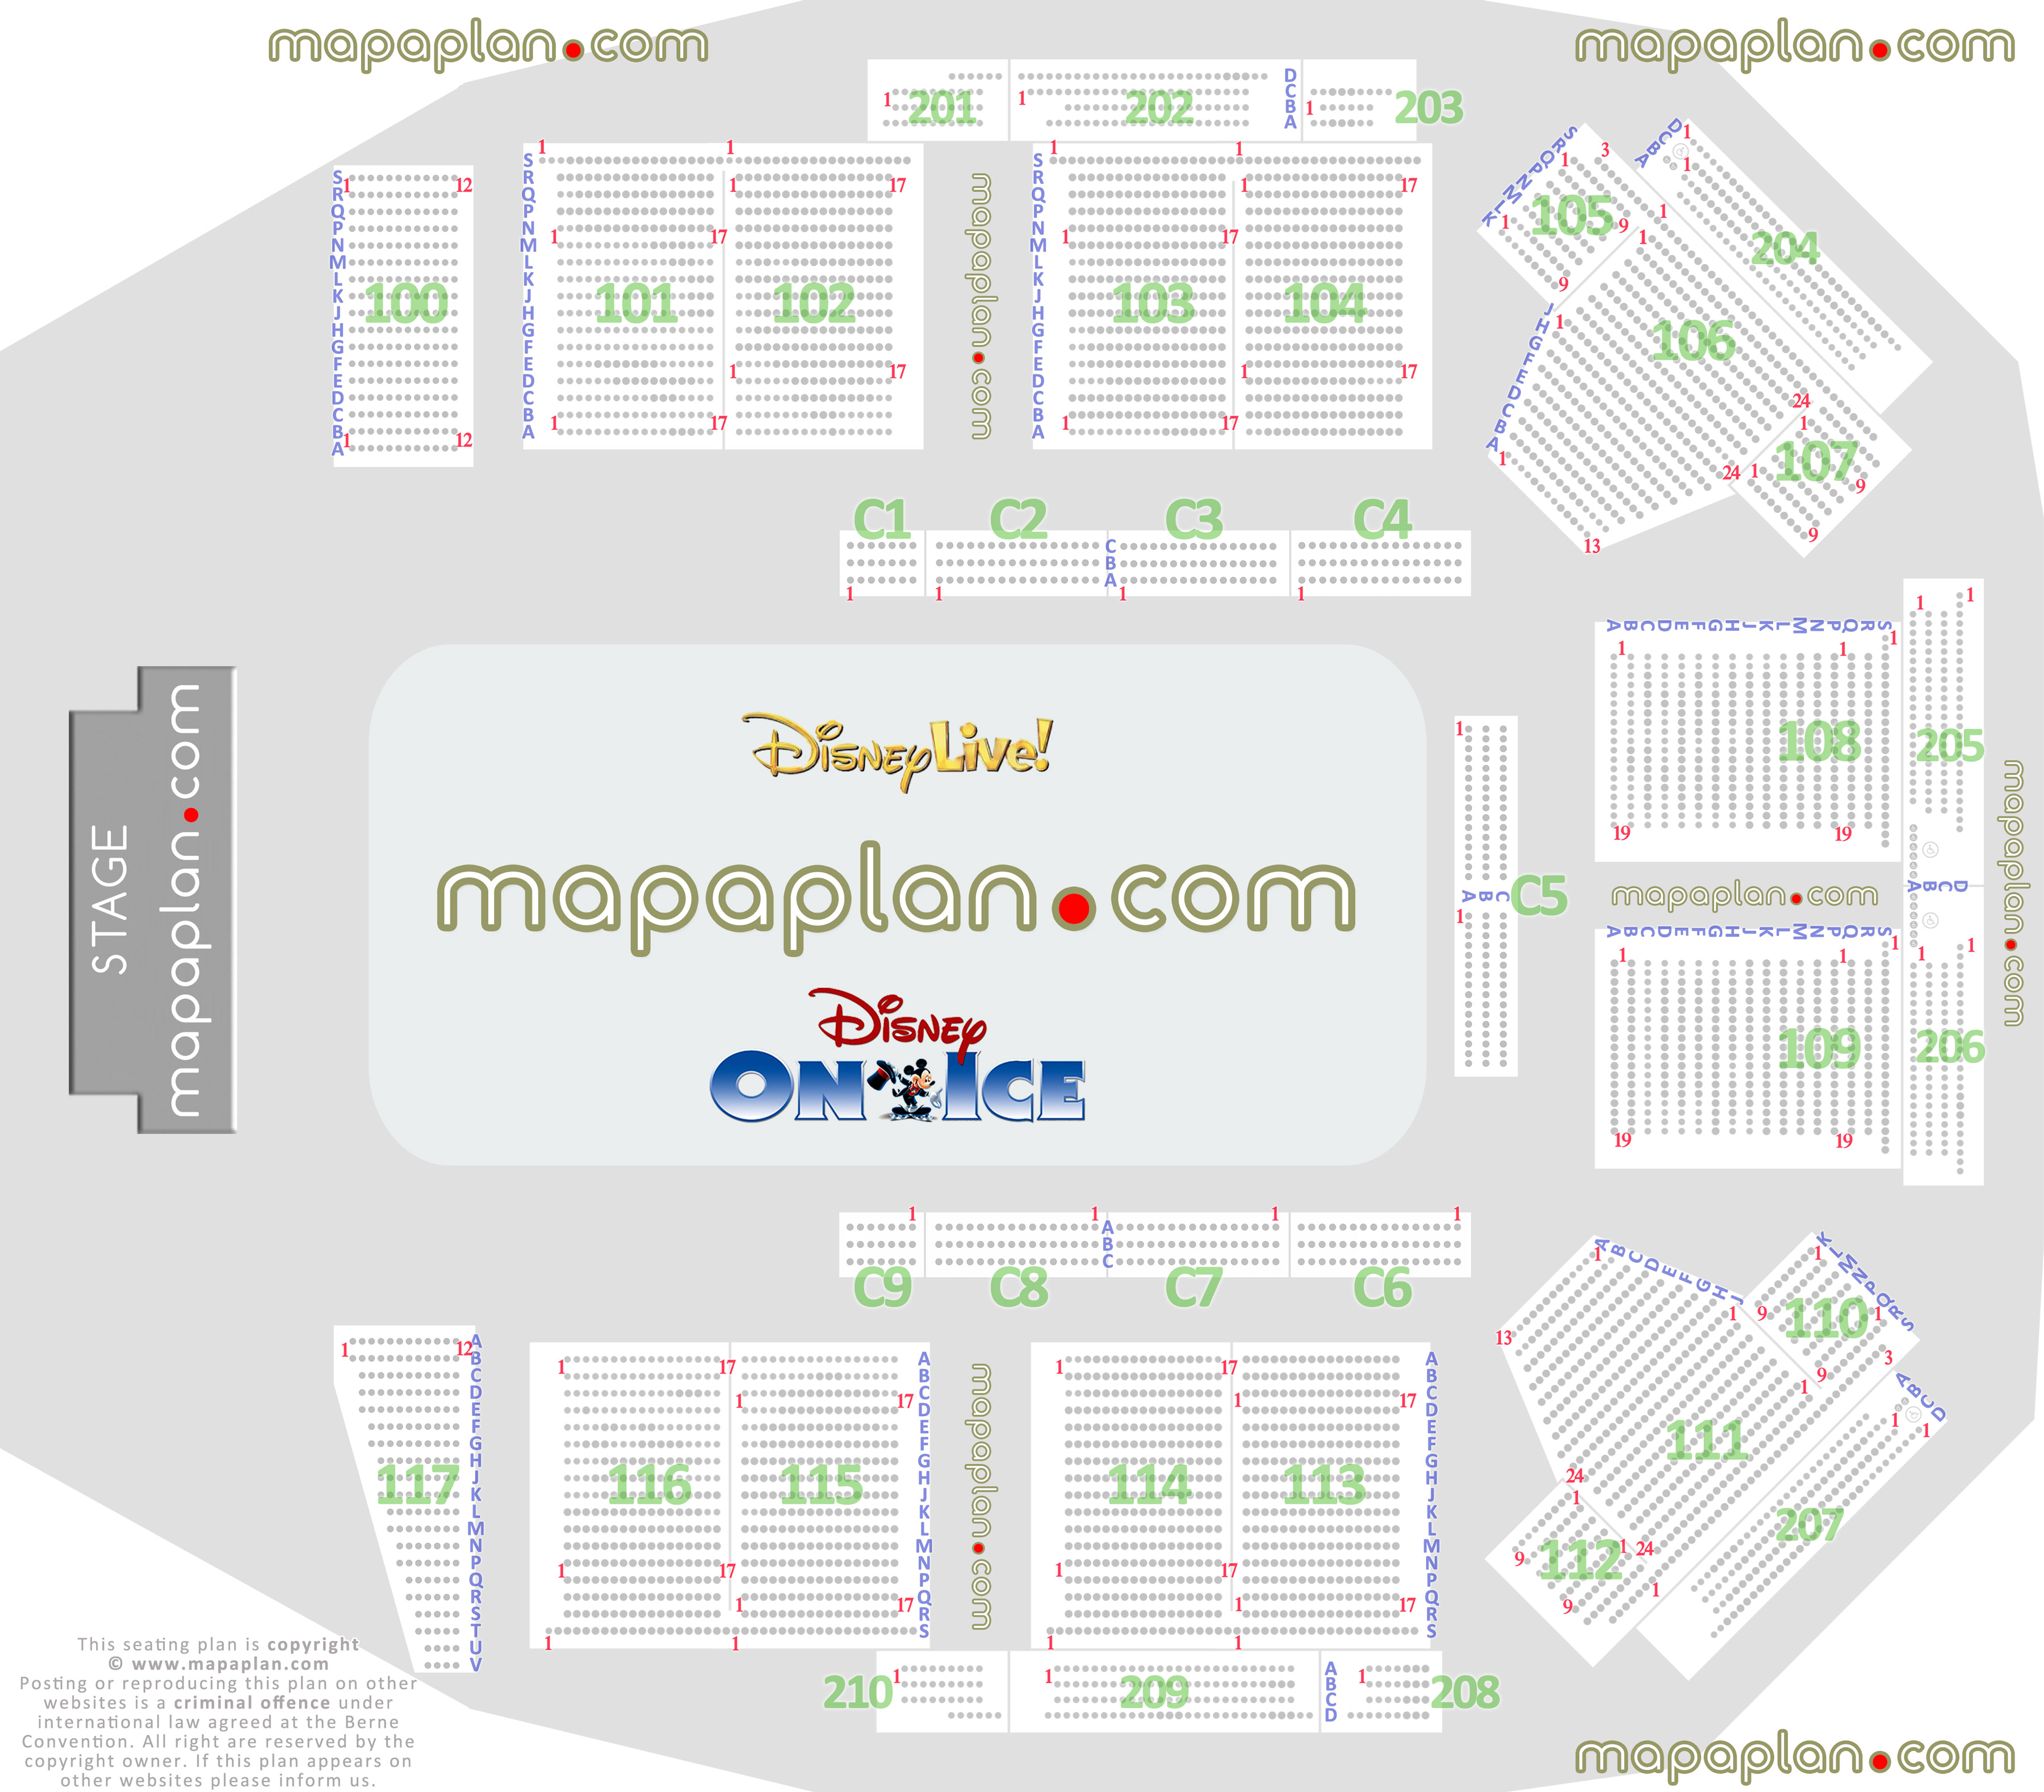 Aberdeen P&J Live The Event Complex Aberdeen TECA seating plan disney ice virtual floor sections best seat finder tool precise detailed seat row numbering location data virtual interactive map